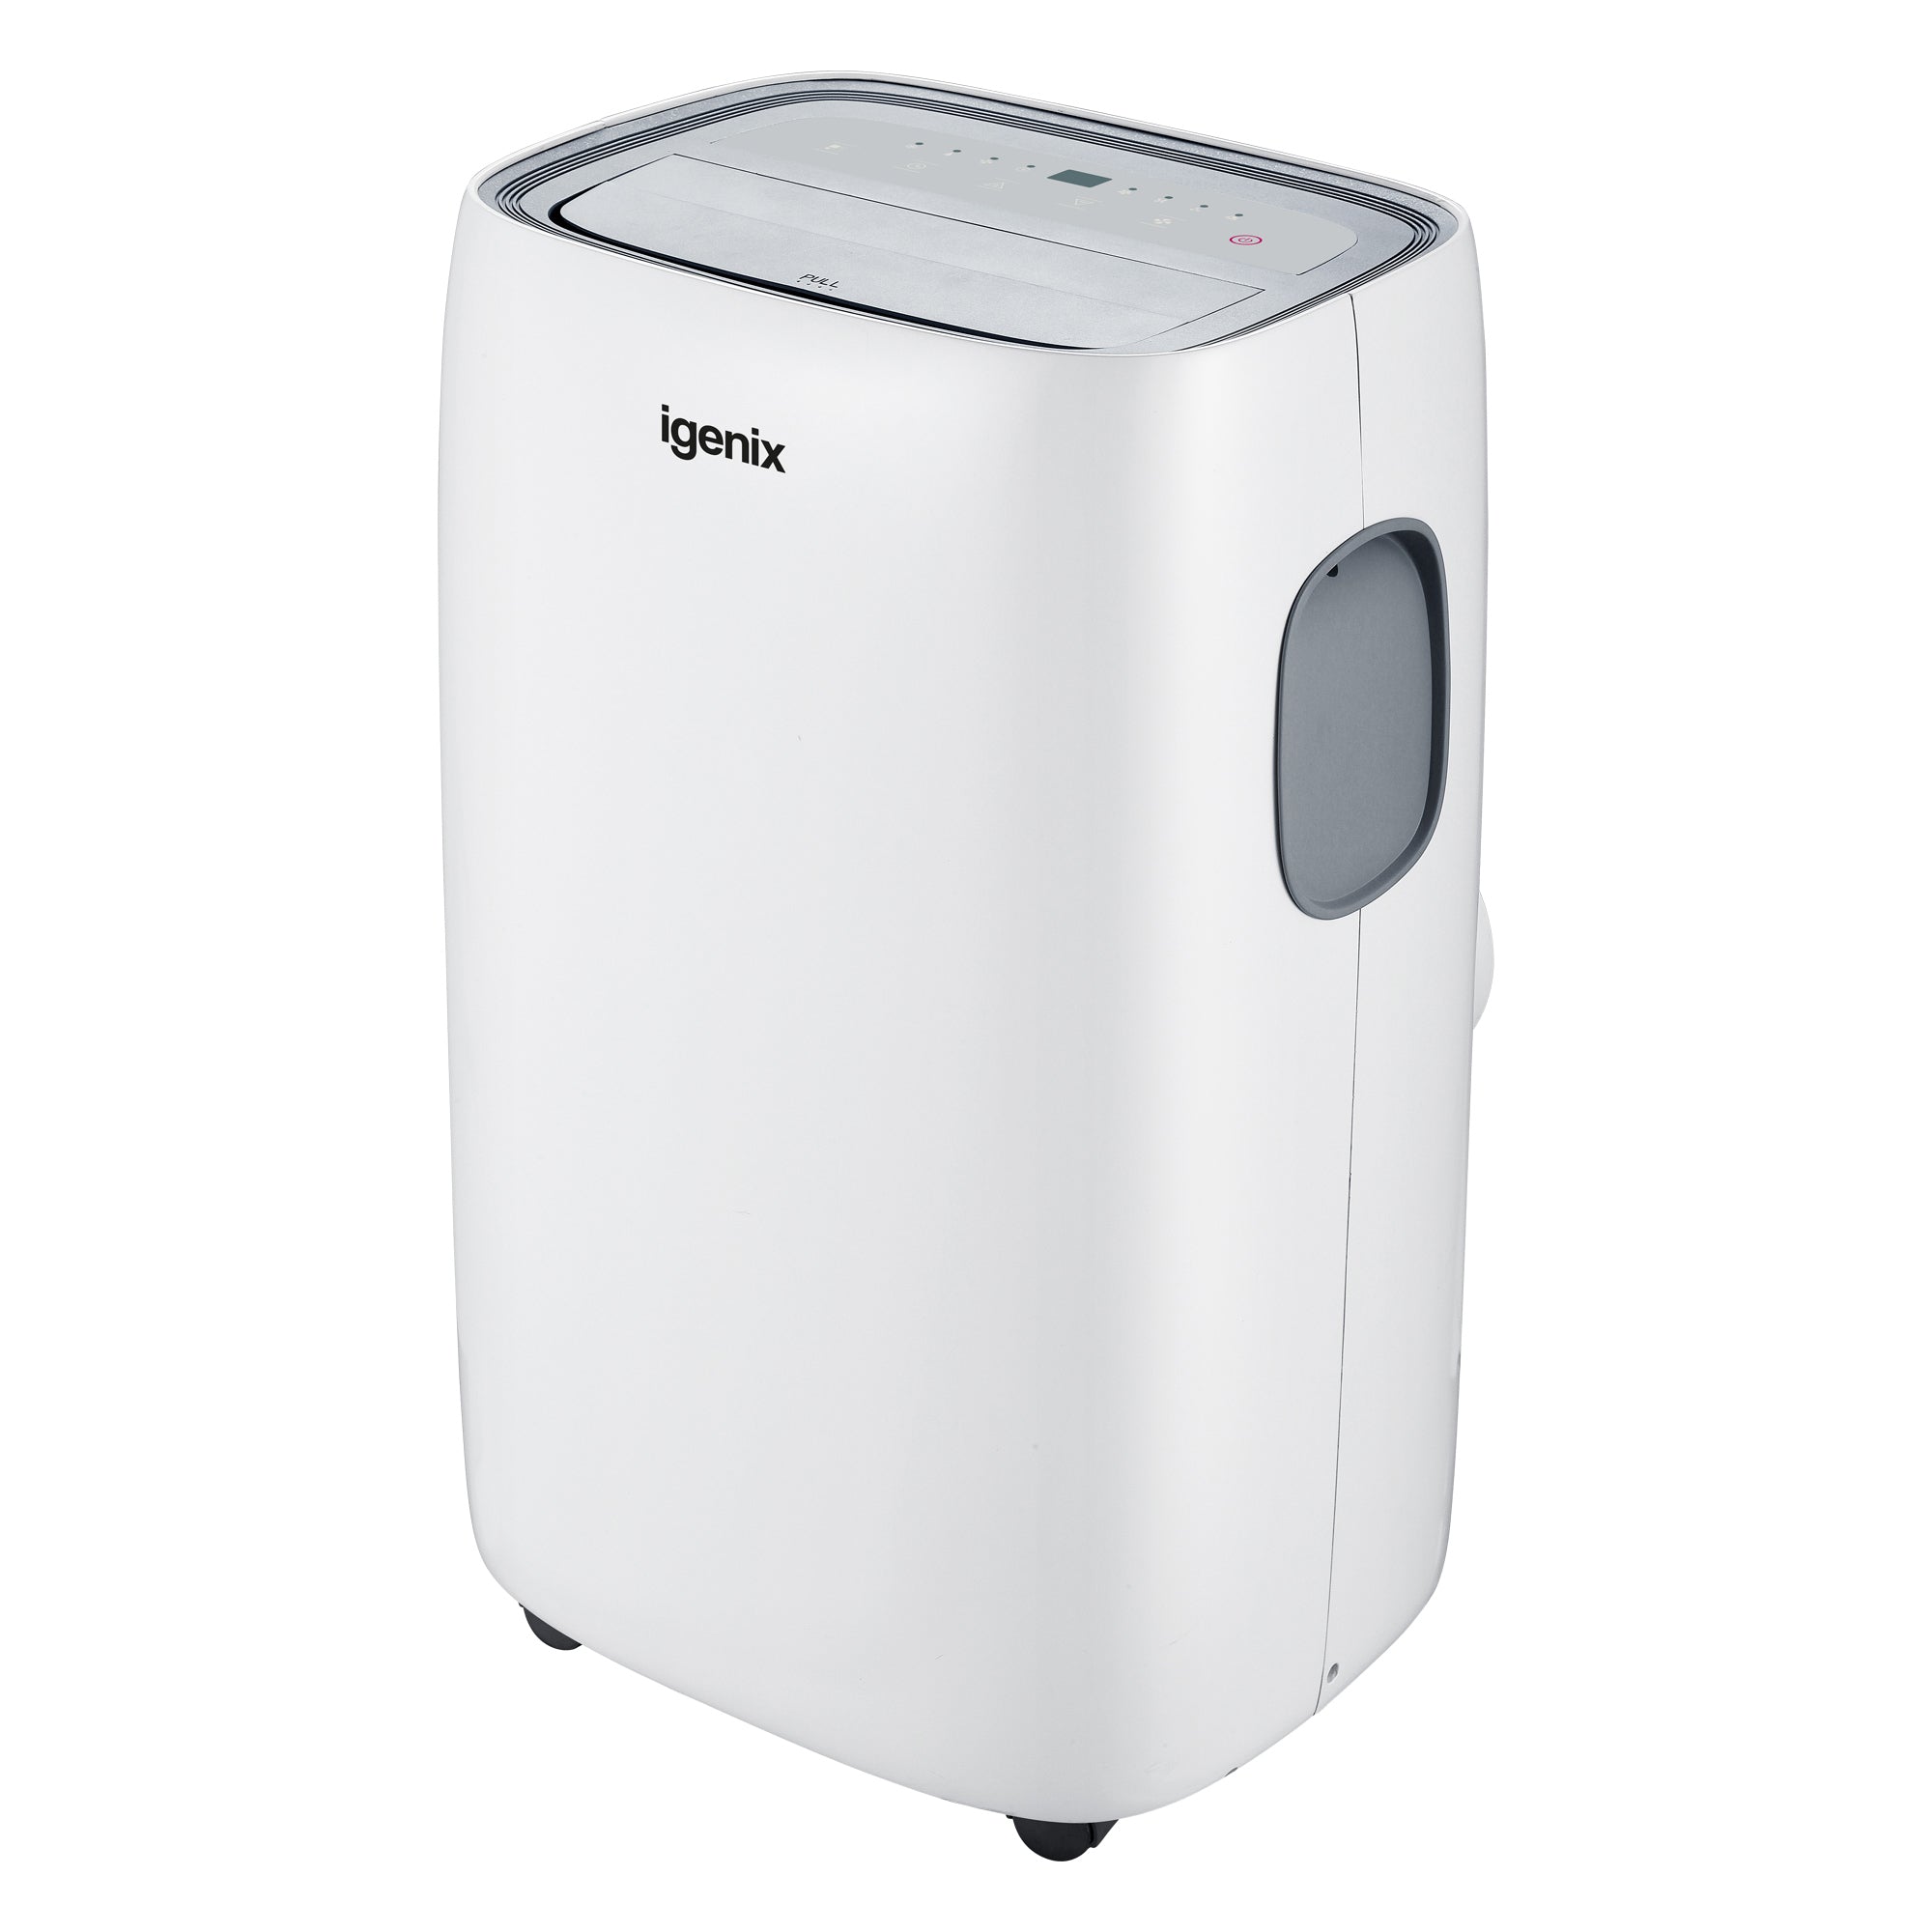 4-in-1 Portable Air Conditioner, Cooling, Heating & Dehumidifier, 9000 BTU